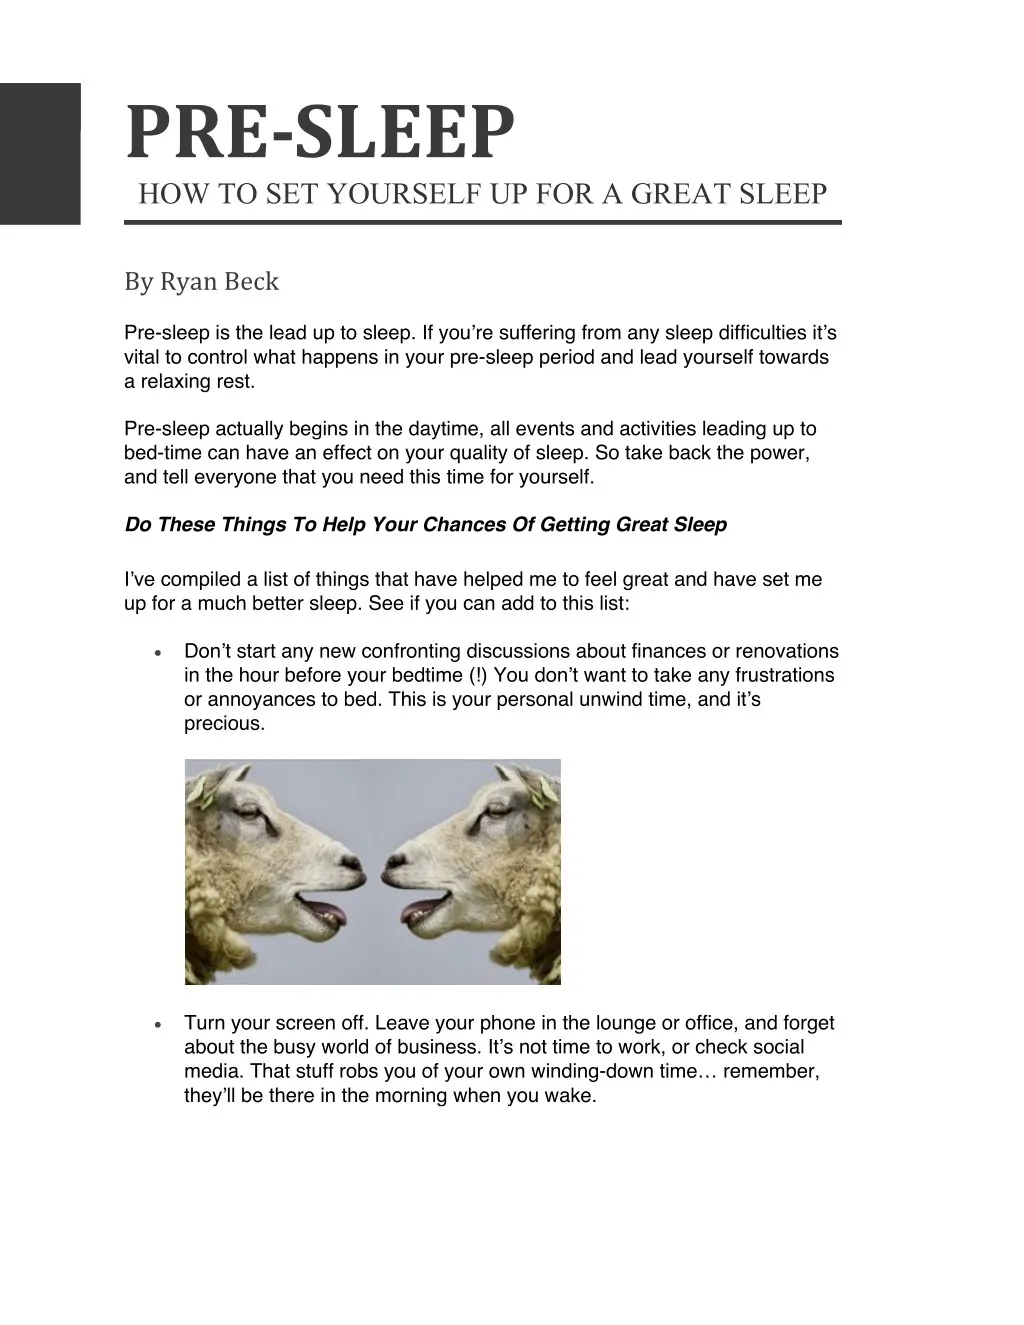 pre sleep how to set yourself up for a great sleep